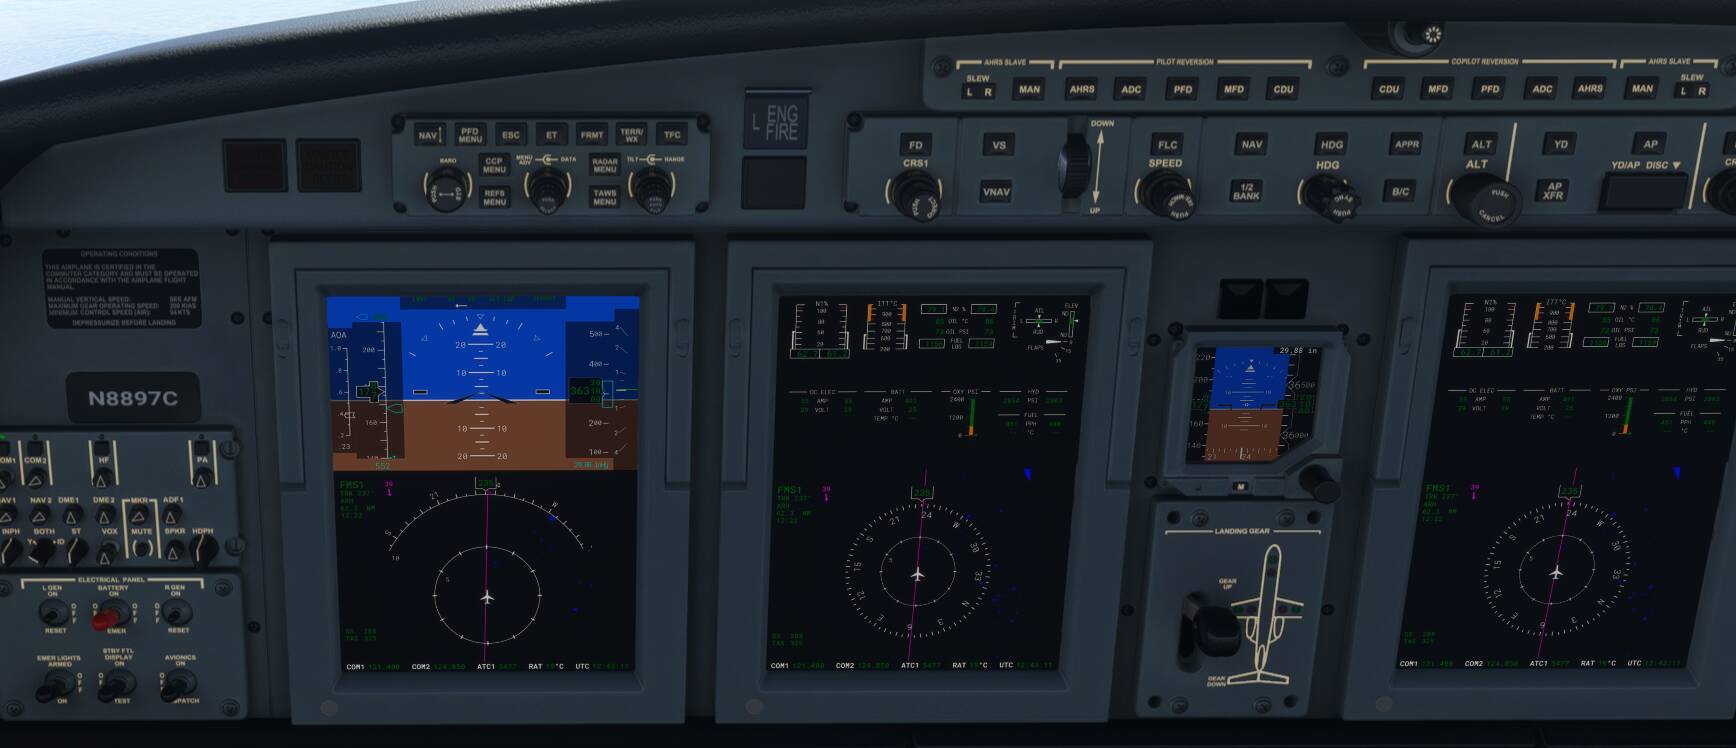 Esc Pause Deploys Spoilers And Full Flaps While In Flight - Aircraft &  Systems - Microsoft Flight Simulator Forums